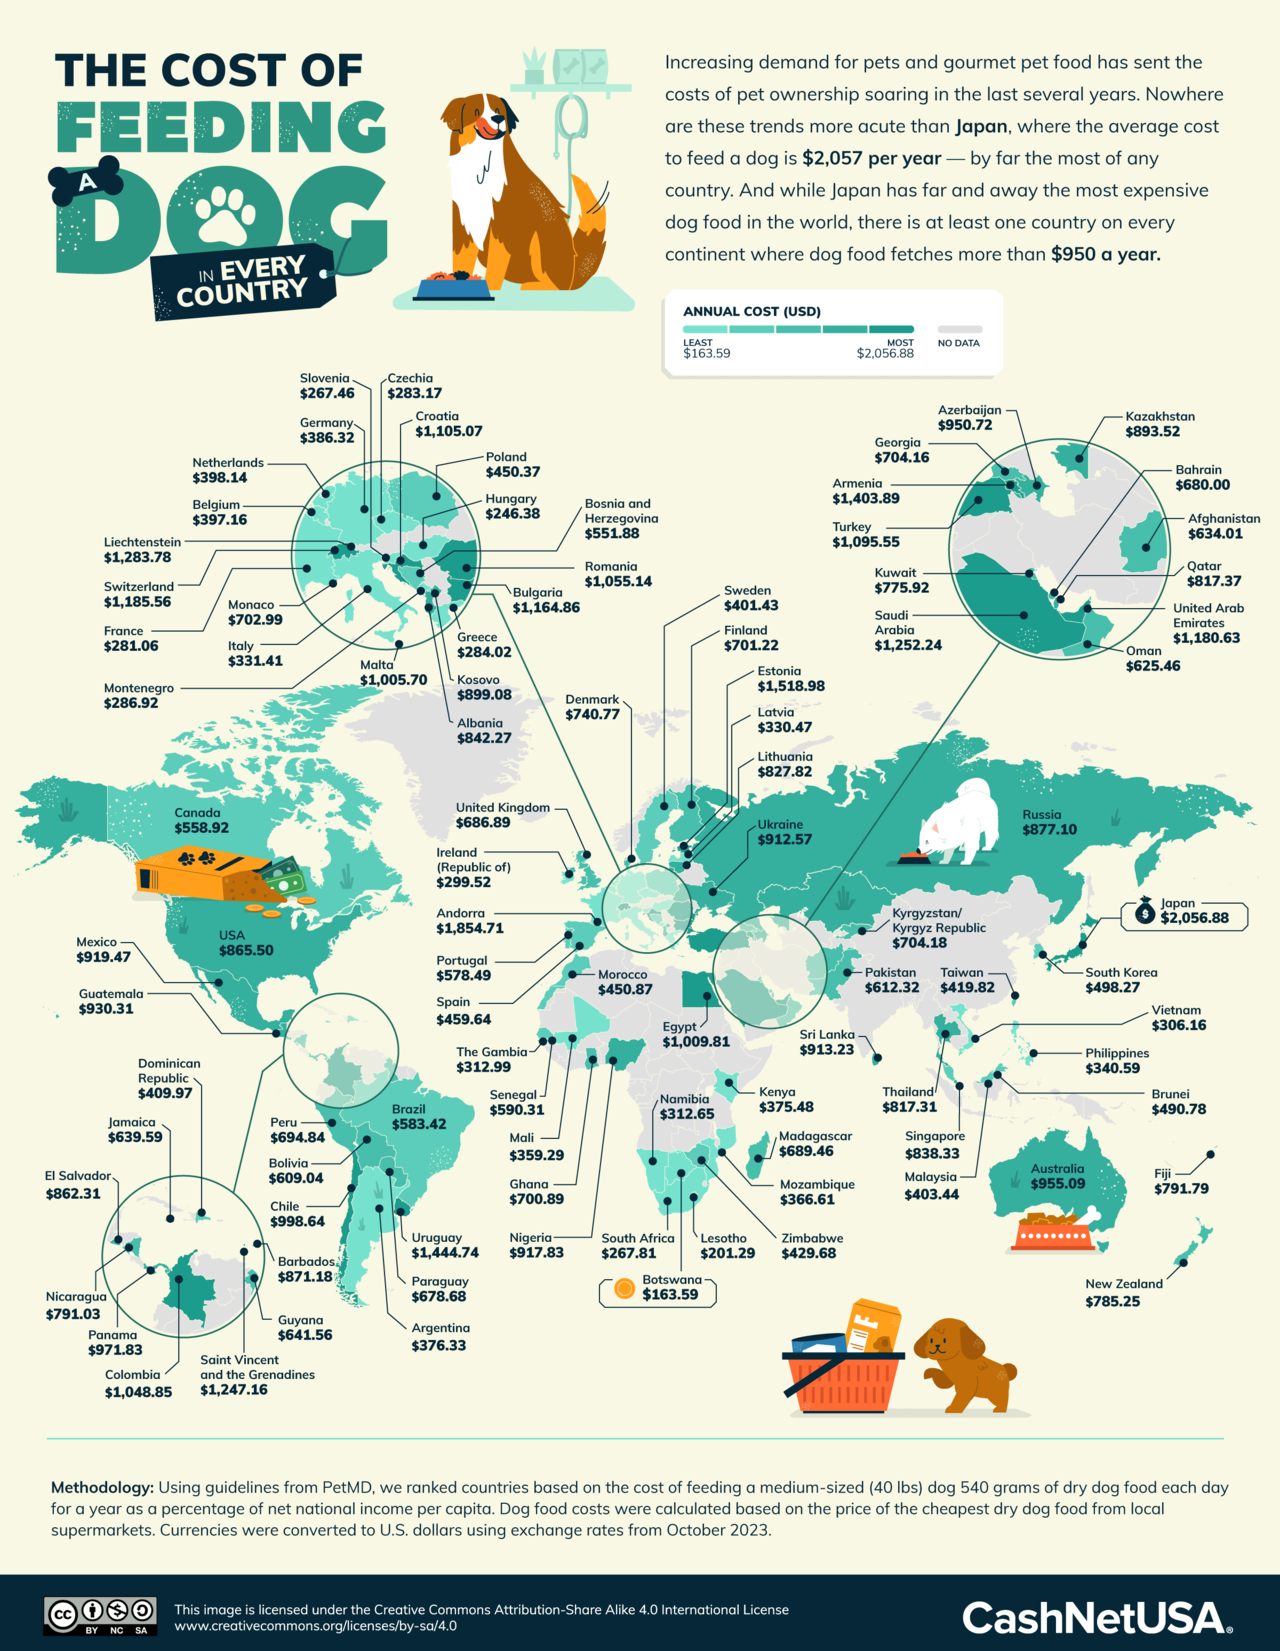 CashNetUSA researched the price of the cheapest dry dog food from local supermarkets of 97 countries to find where in the 